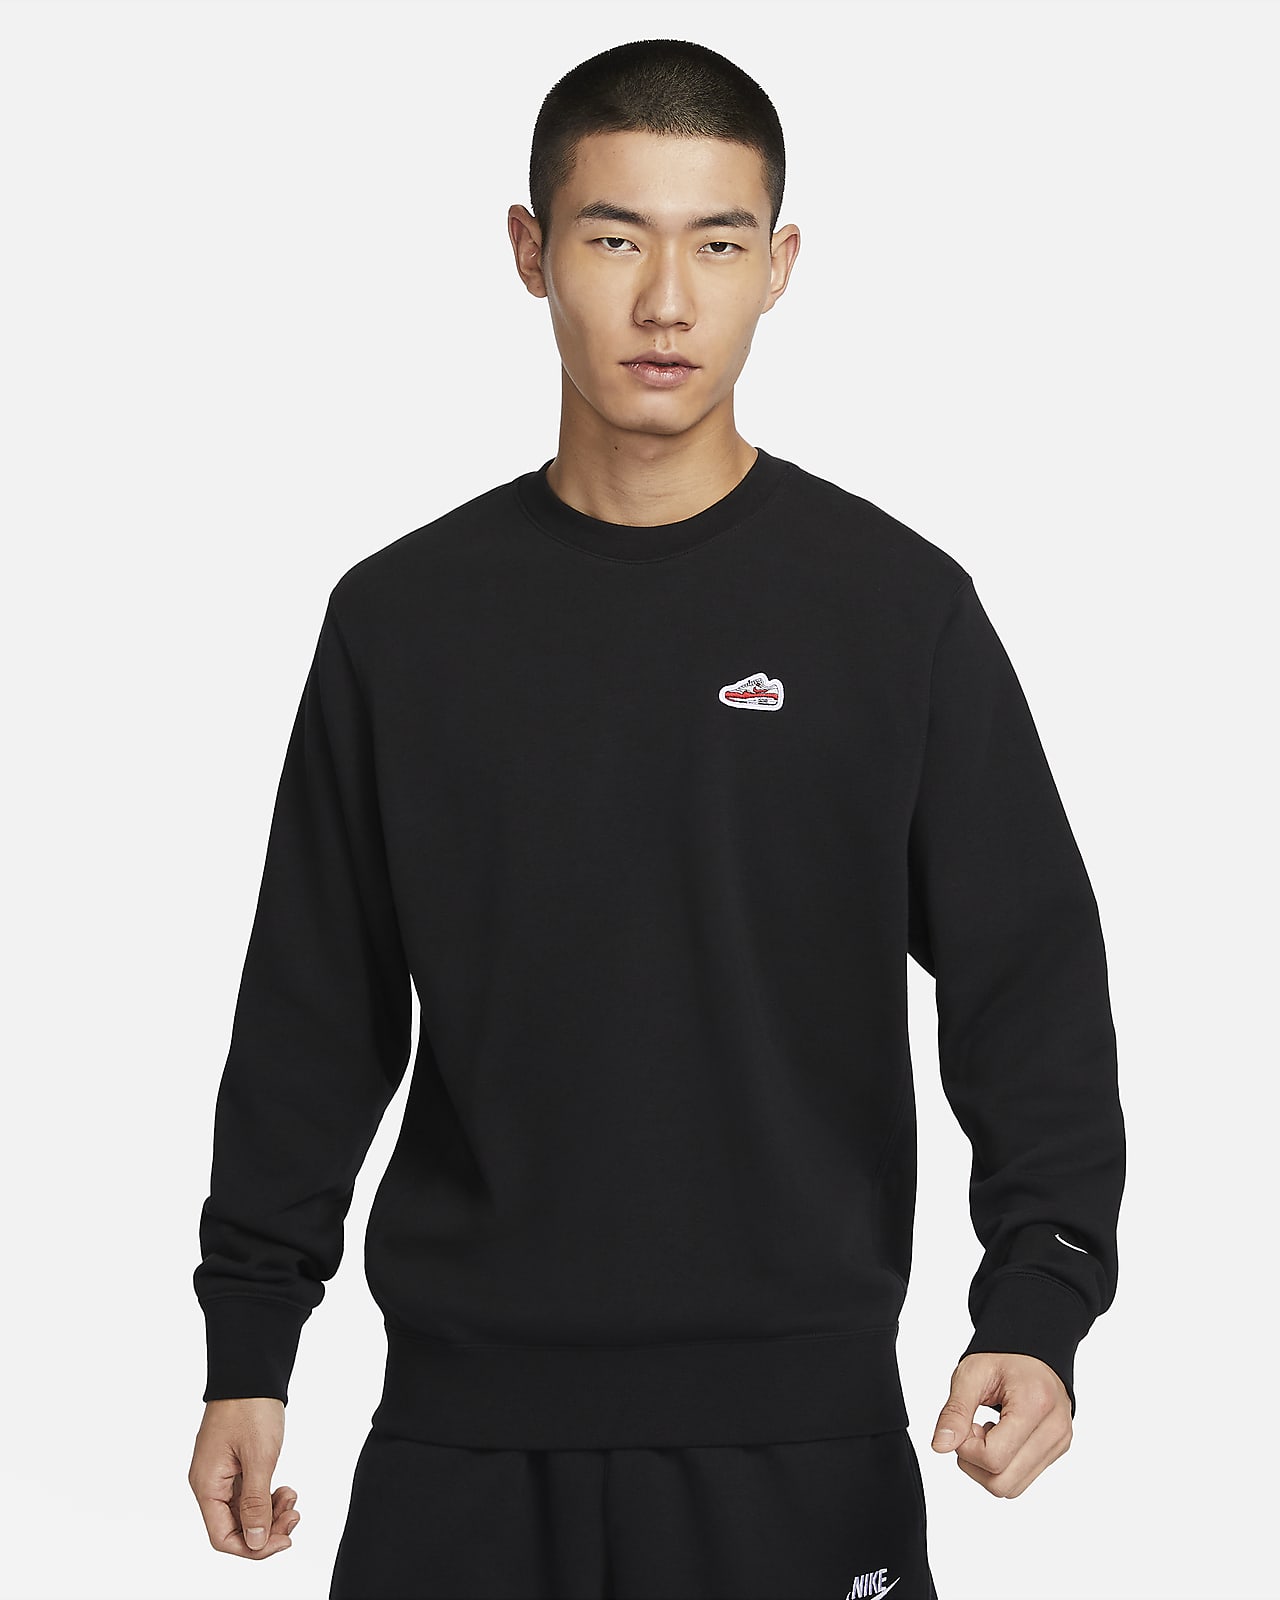 https://static.nike.com/a/images/t_PDP_1280_v1/f_auto,q_auto:eco/0b14d14a-0416-49a0-b0cf-9e48fb7fd0b1/sportswear-mens-french-terry-crew-neck-sweatshirt-9VtPDg.png